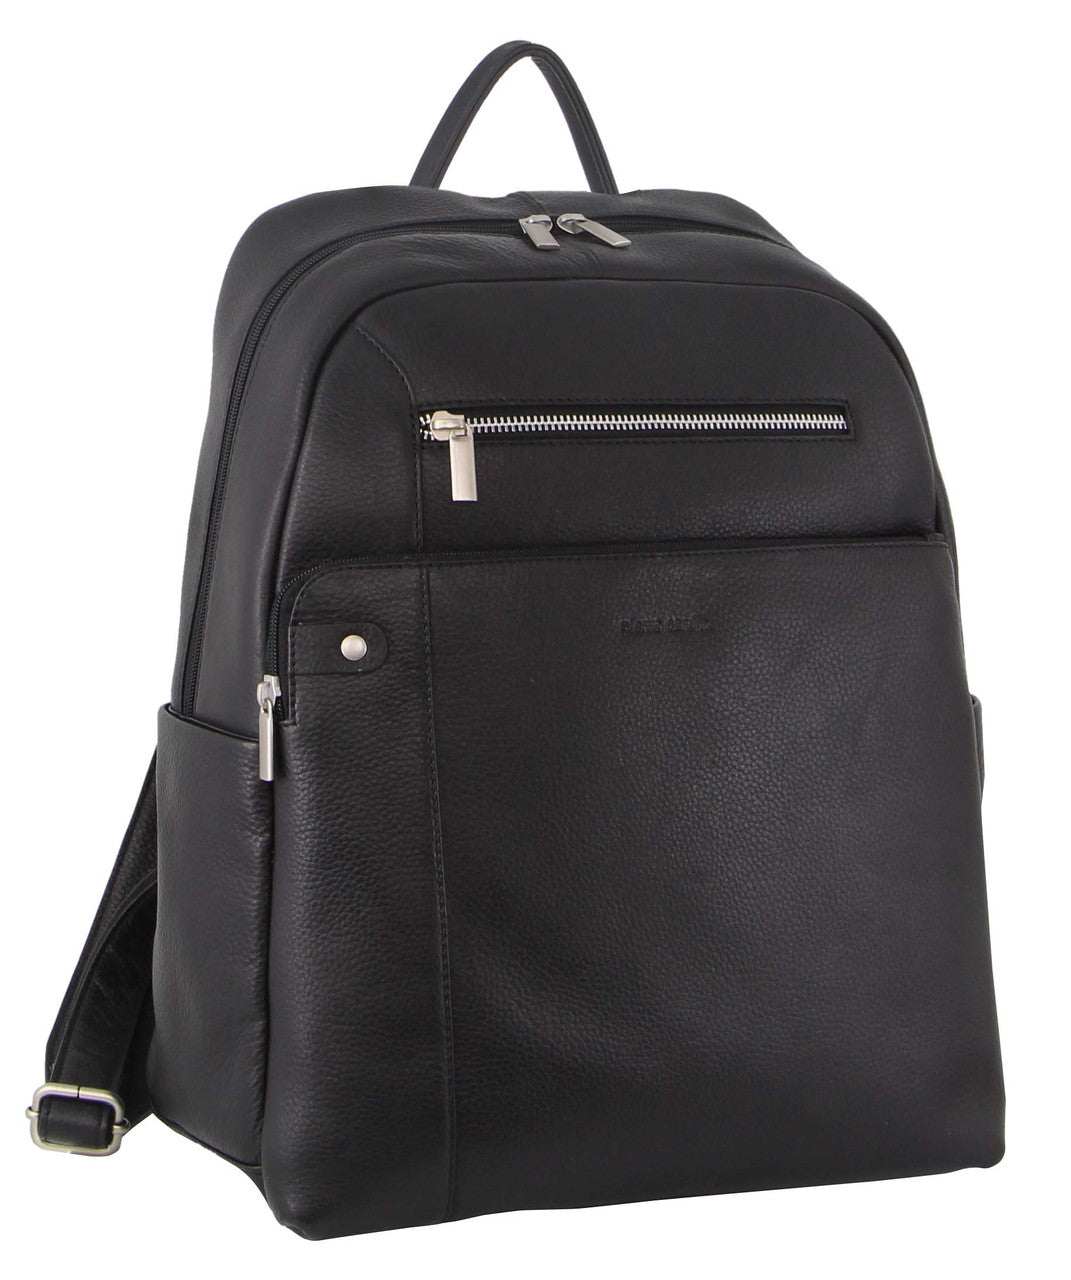 Pierre Cardin Leather Business Laptop Backpack PC3341 Black